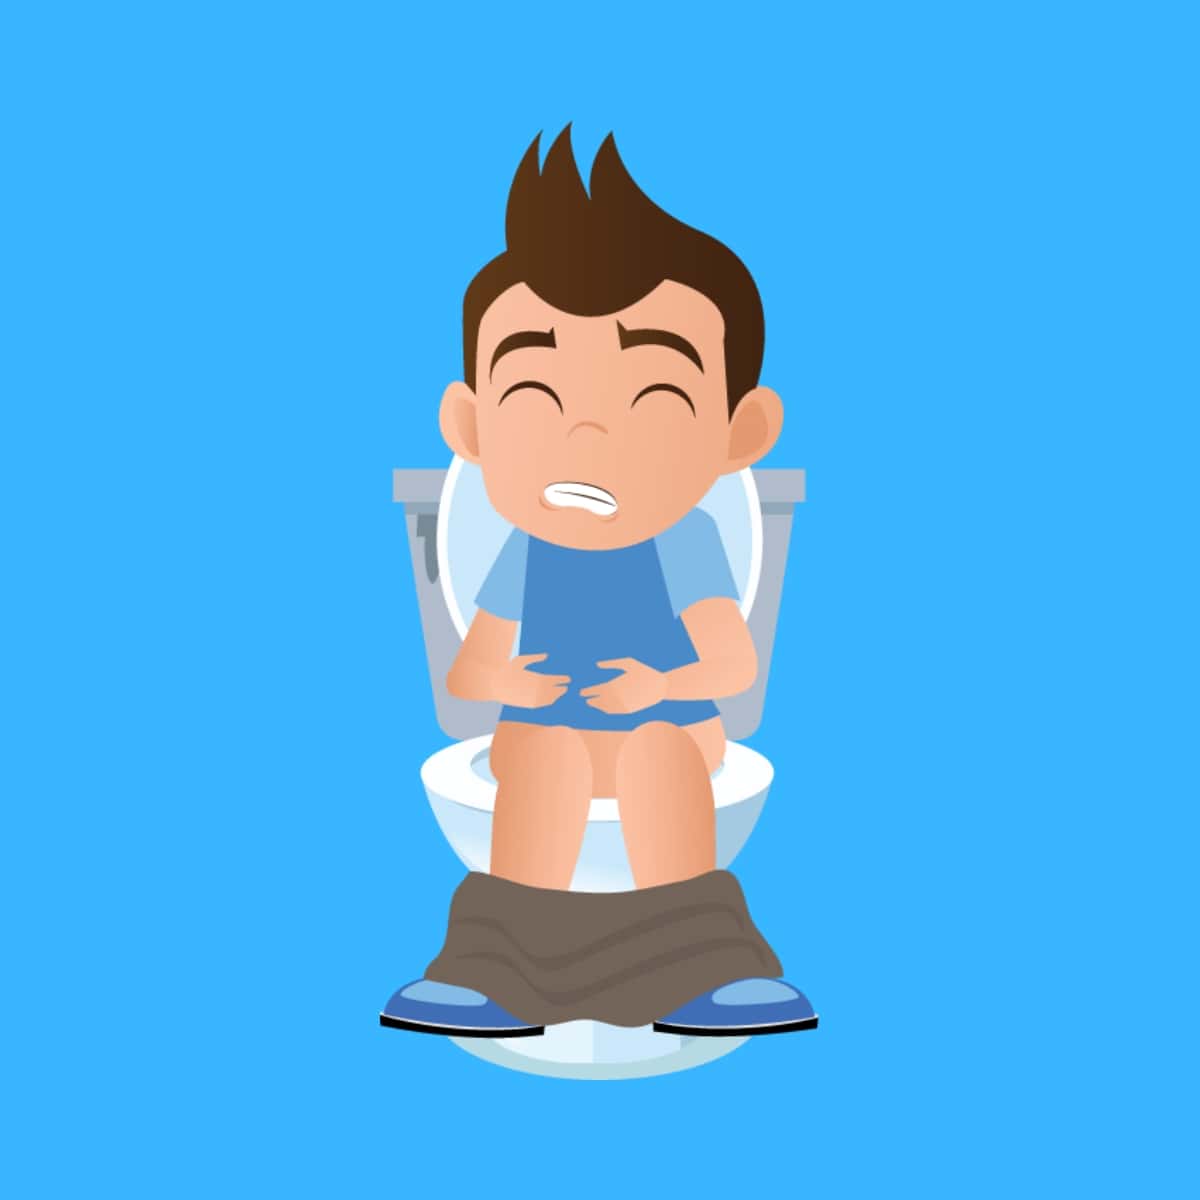 Cartoon graphic of a boy in a blue shirt doing diarrhea on a toilet on a blue background.